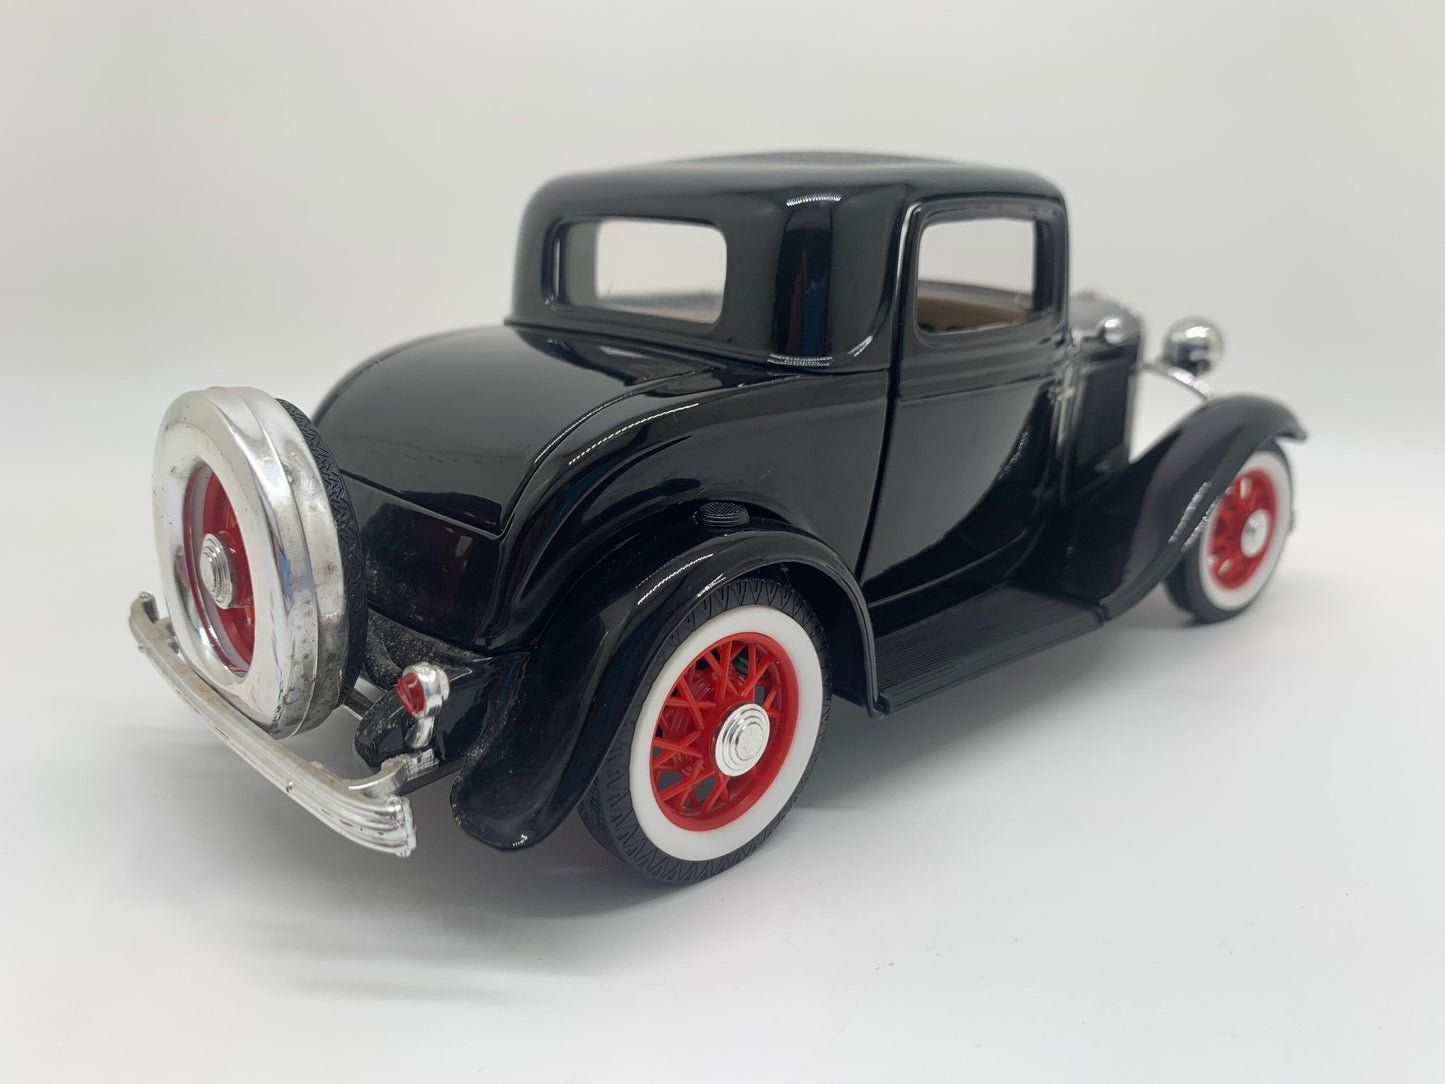 Road Legends Ford 1932 3 Window Black Collectable 118 Scale Model Toy Car Perfect Birthday Gift